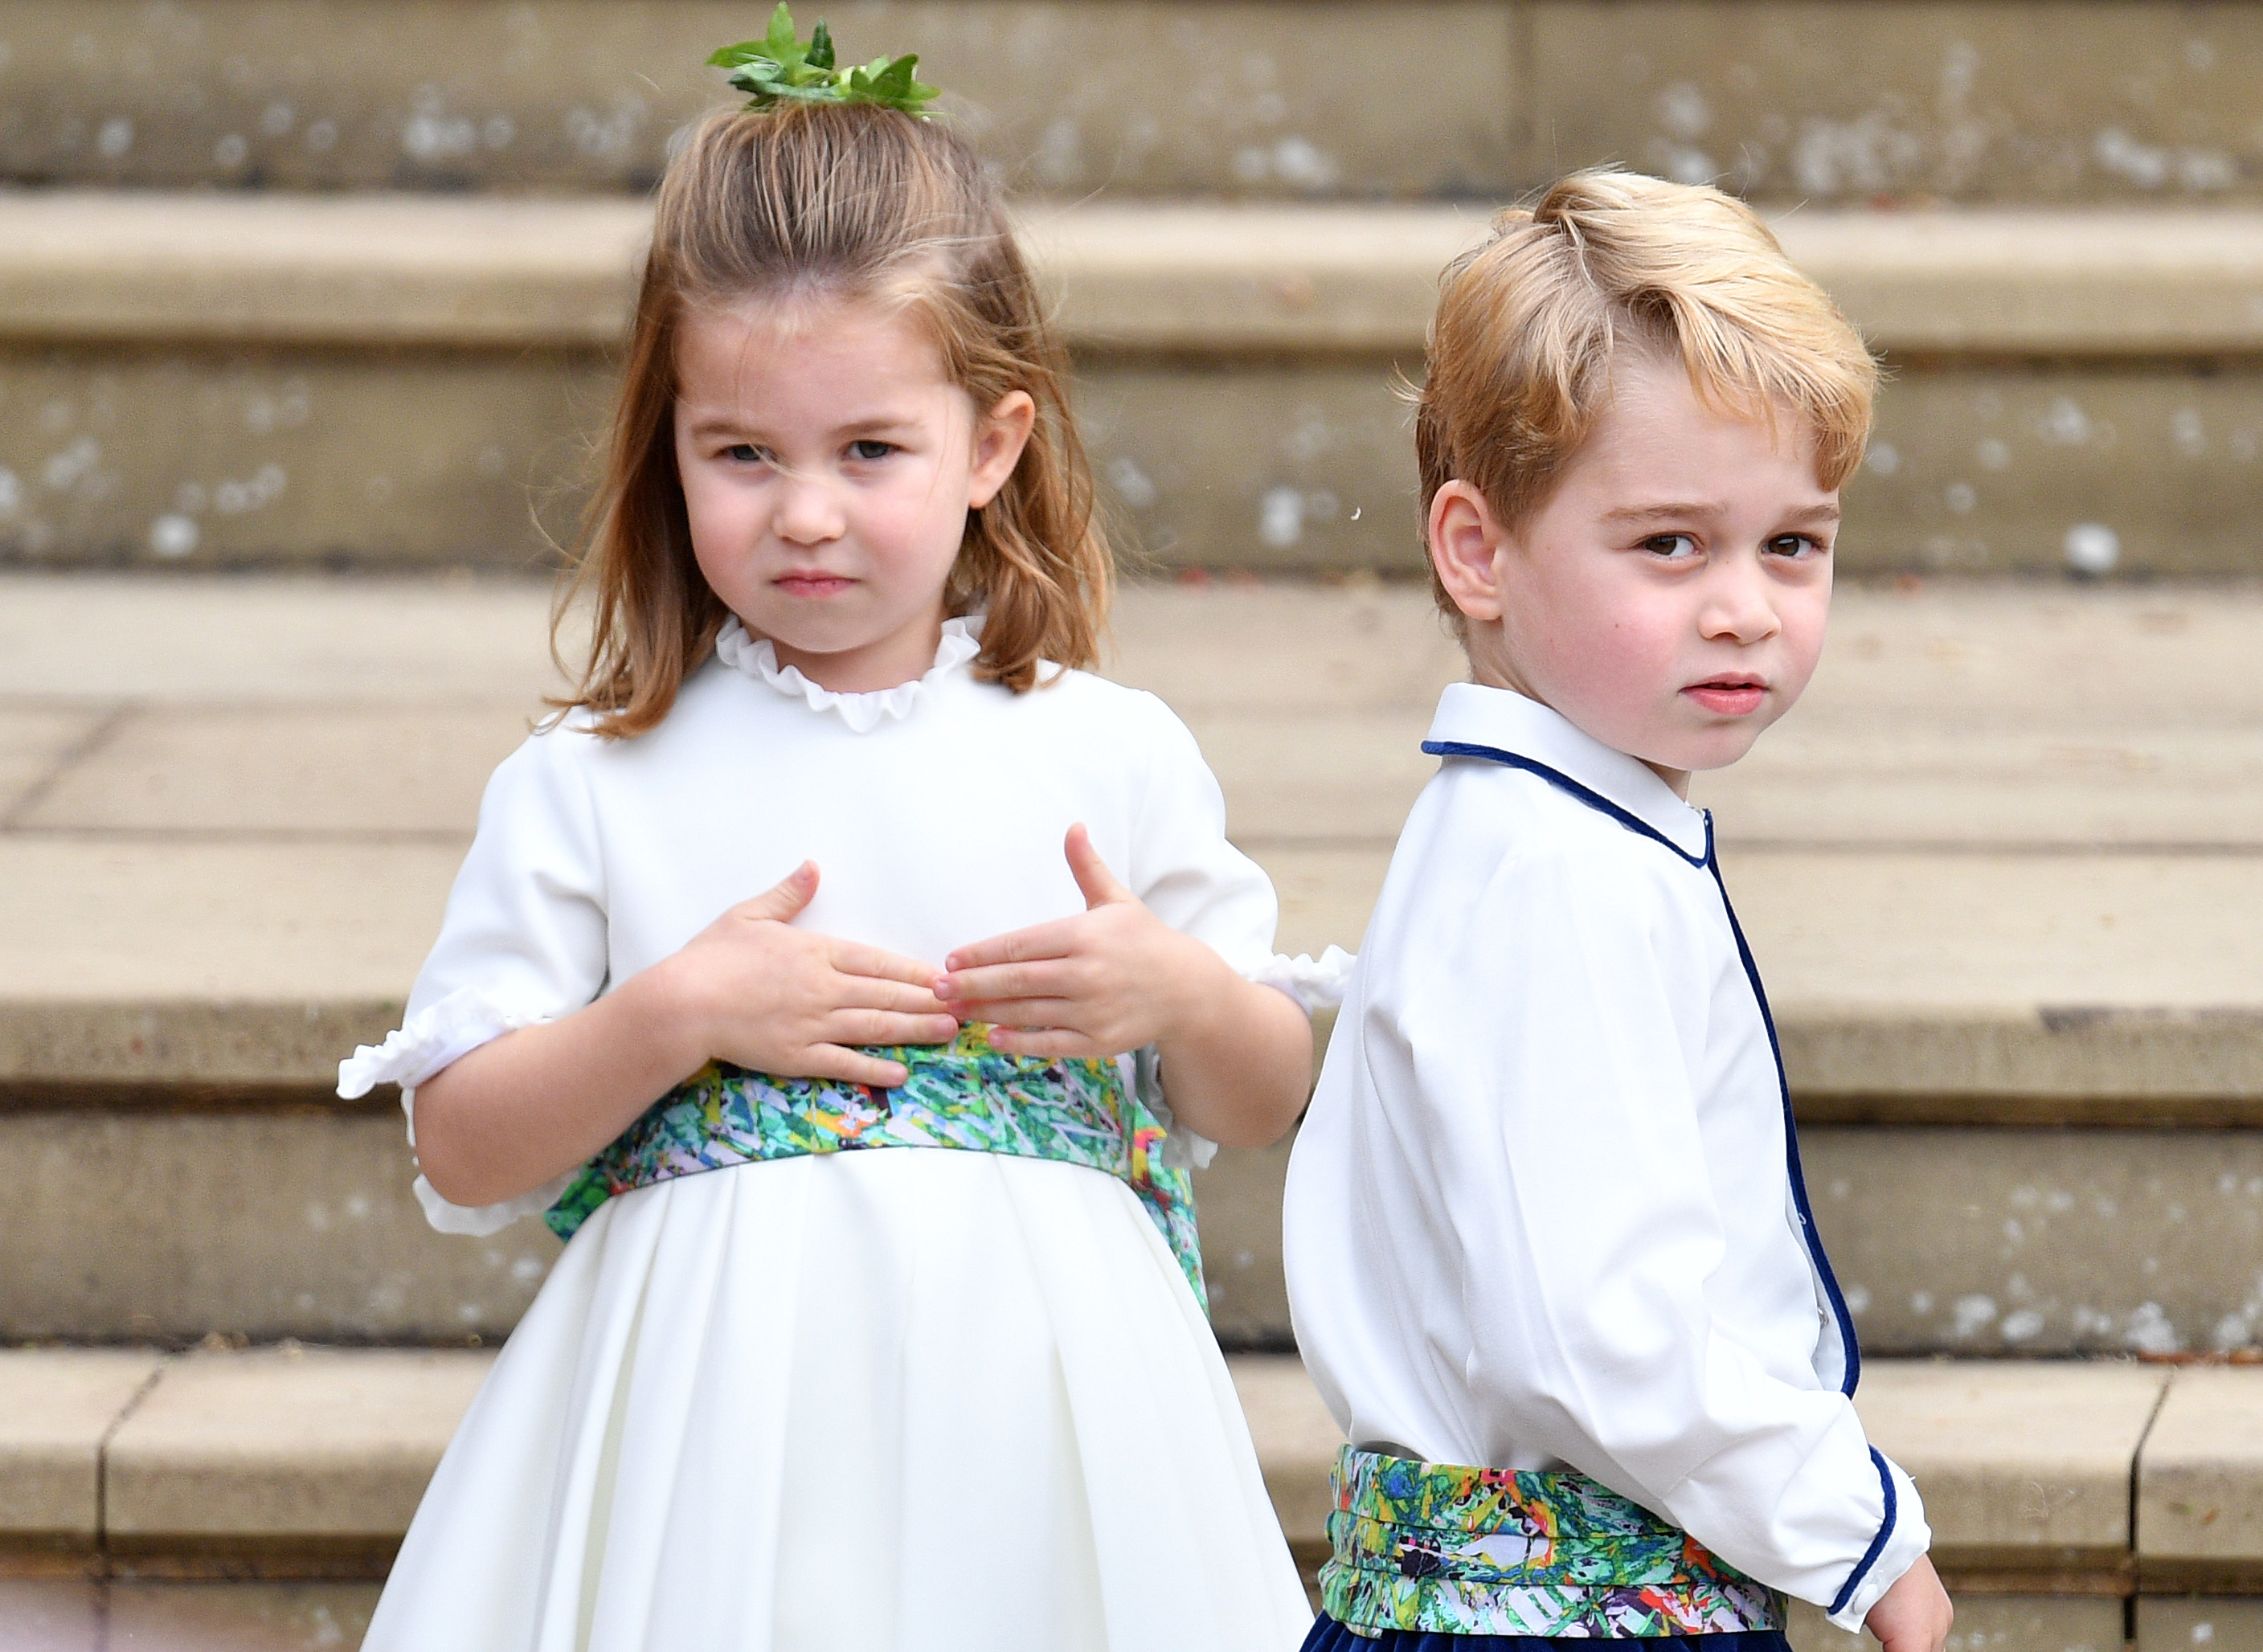 <p>Sibling sweeties! Princess Charlotte and Prince George served as a bridesmaid and a pageboy in second cousin Princess Eugenie's <a href="https://www.wonderwall.com/celebrity/couples/princess-eugenie-jack-brooksbank-royal-wedding-day-all-details-you-need-know-and-see-dress-tiara-guests-more-3016793.gallery">wedding</a> at St. George's Chapel at Windsor Castle on Oct. 12, 2018.</p>